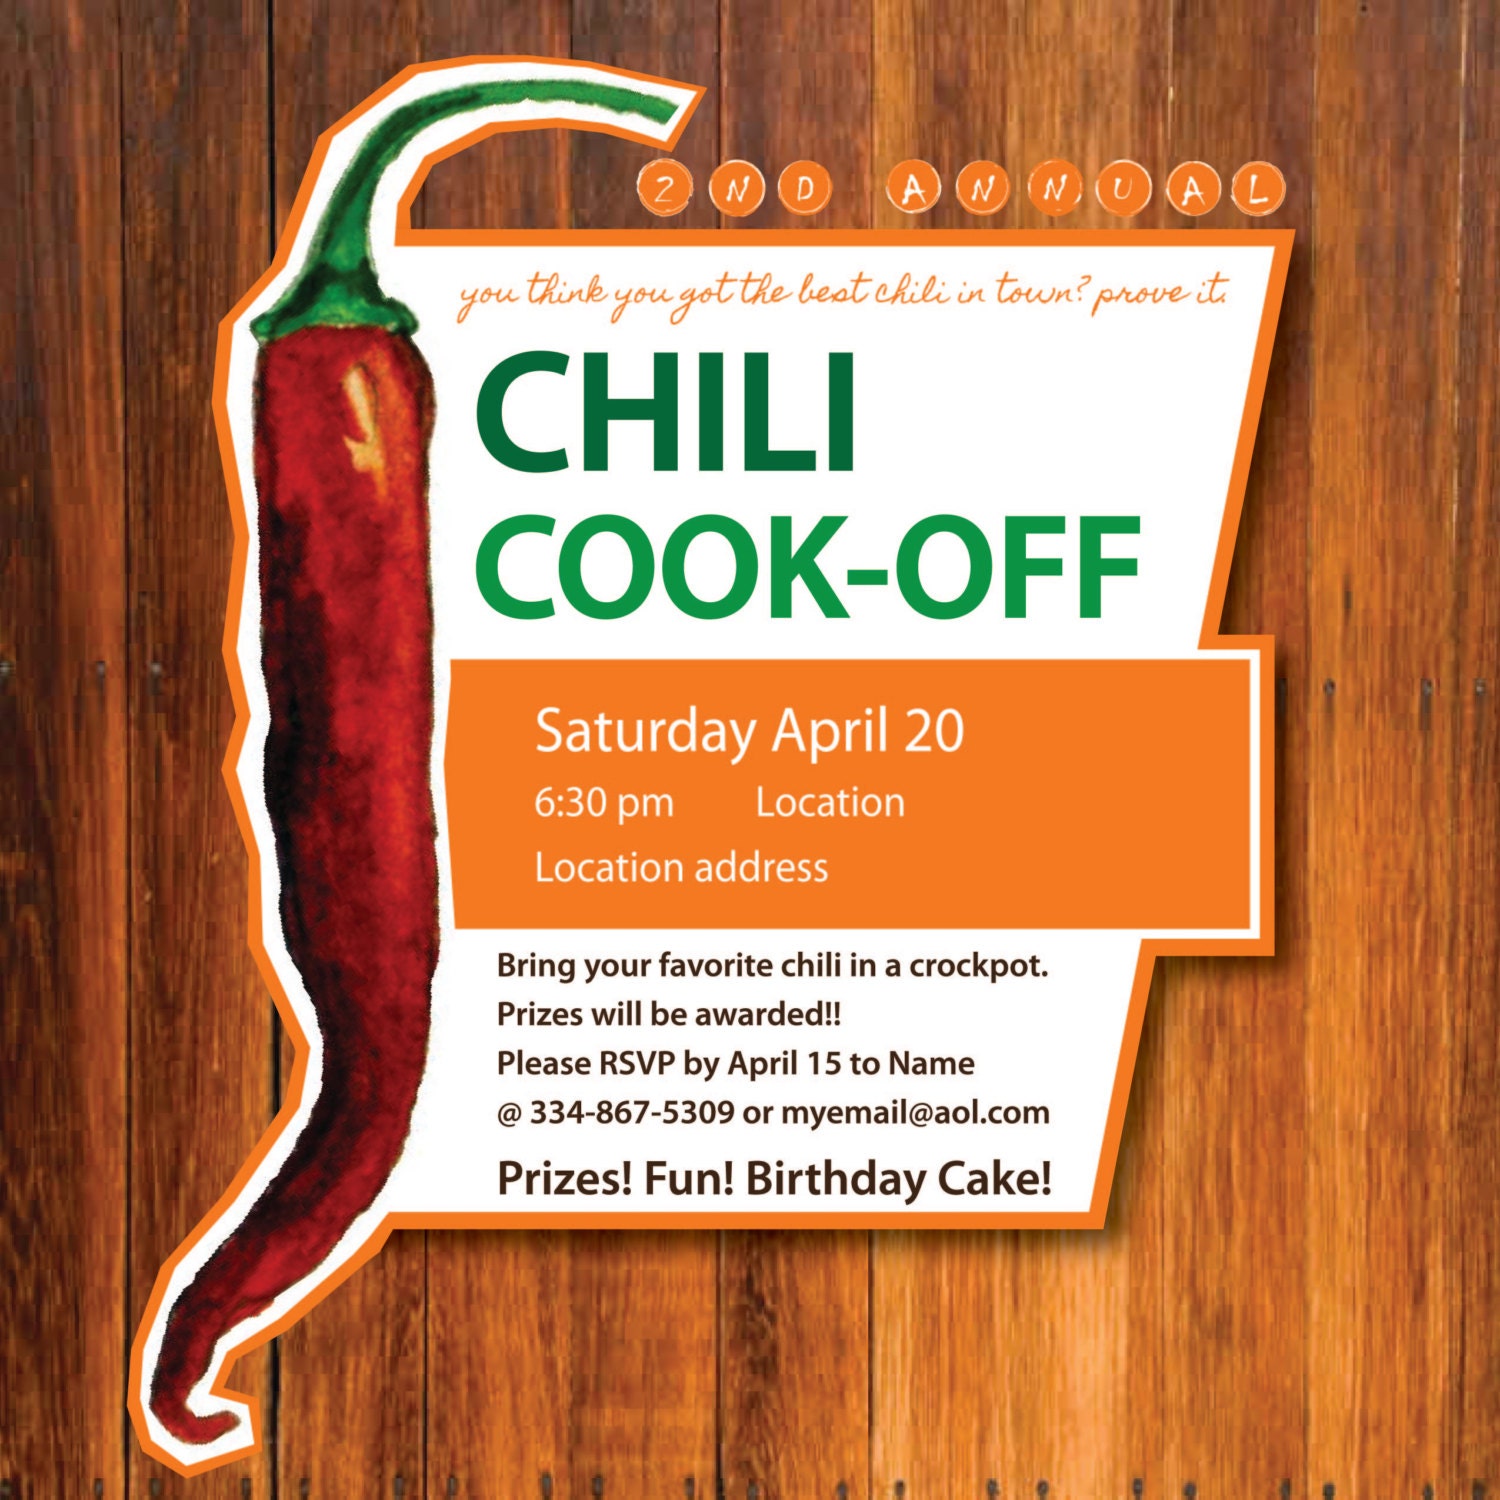 Chili Cookoff Invitation by JessiBGraphicDesign on Etsy